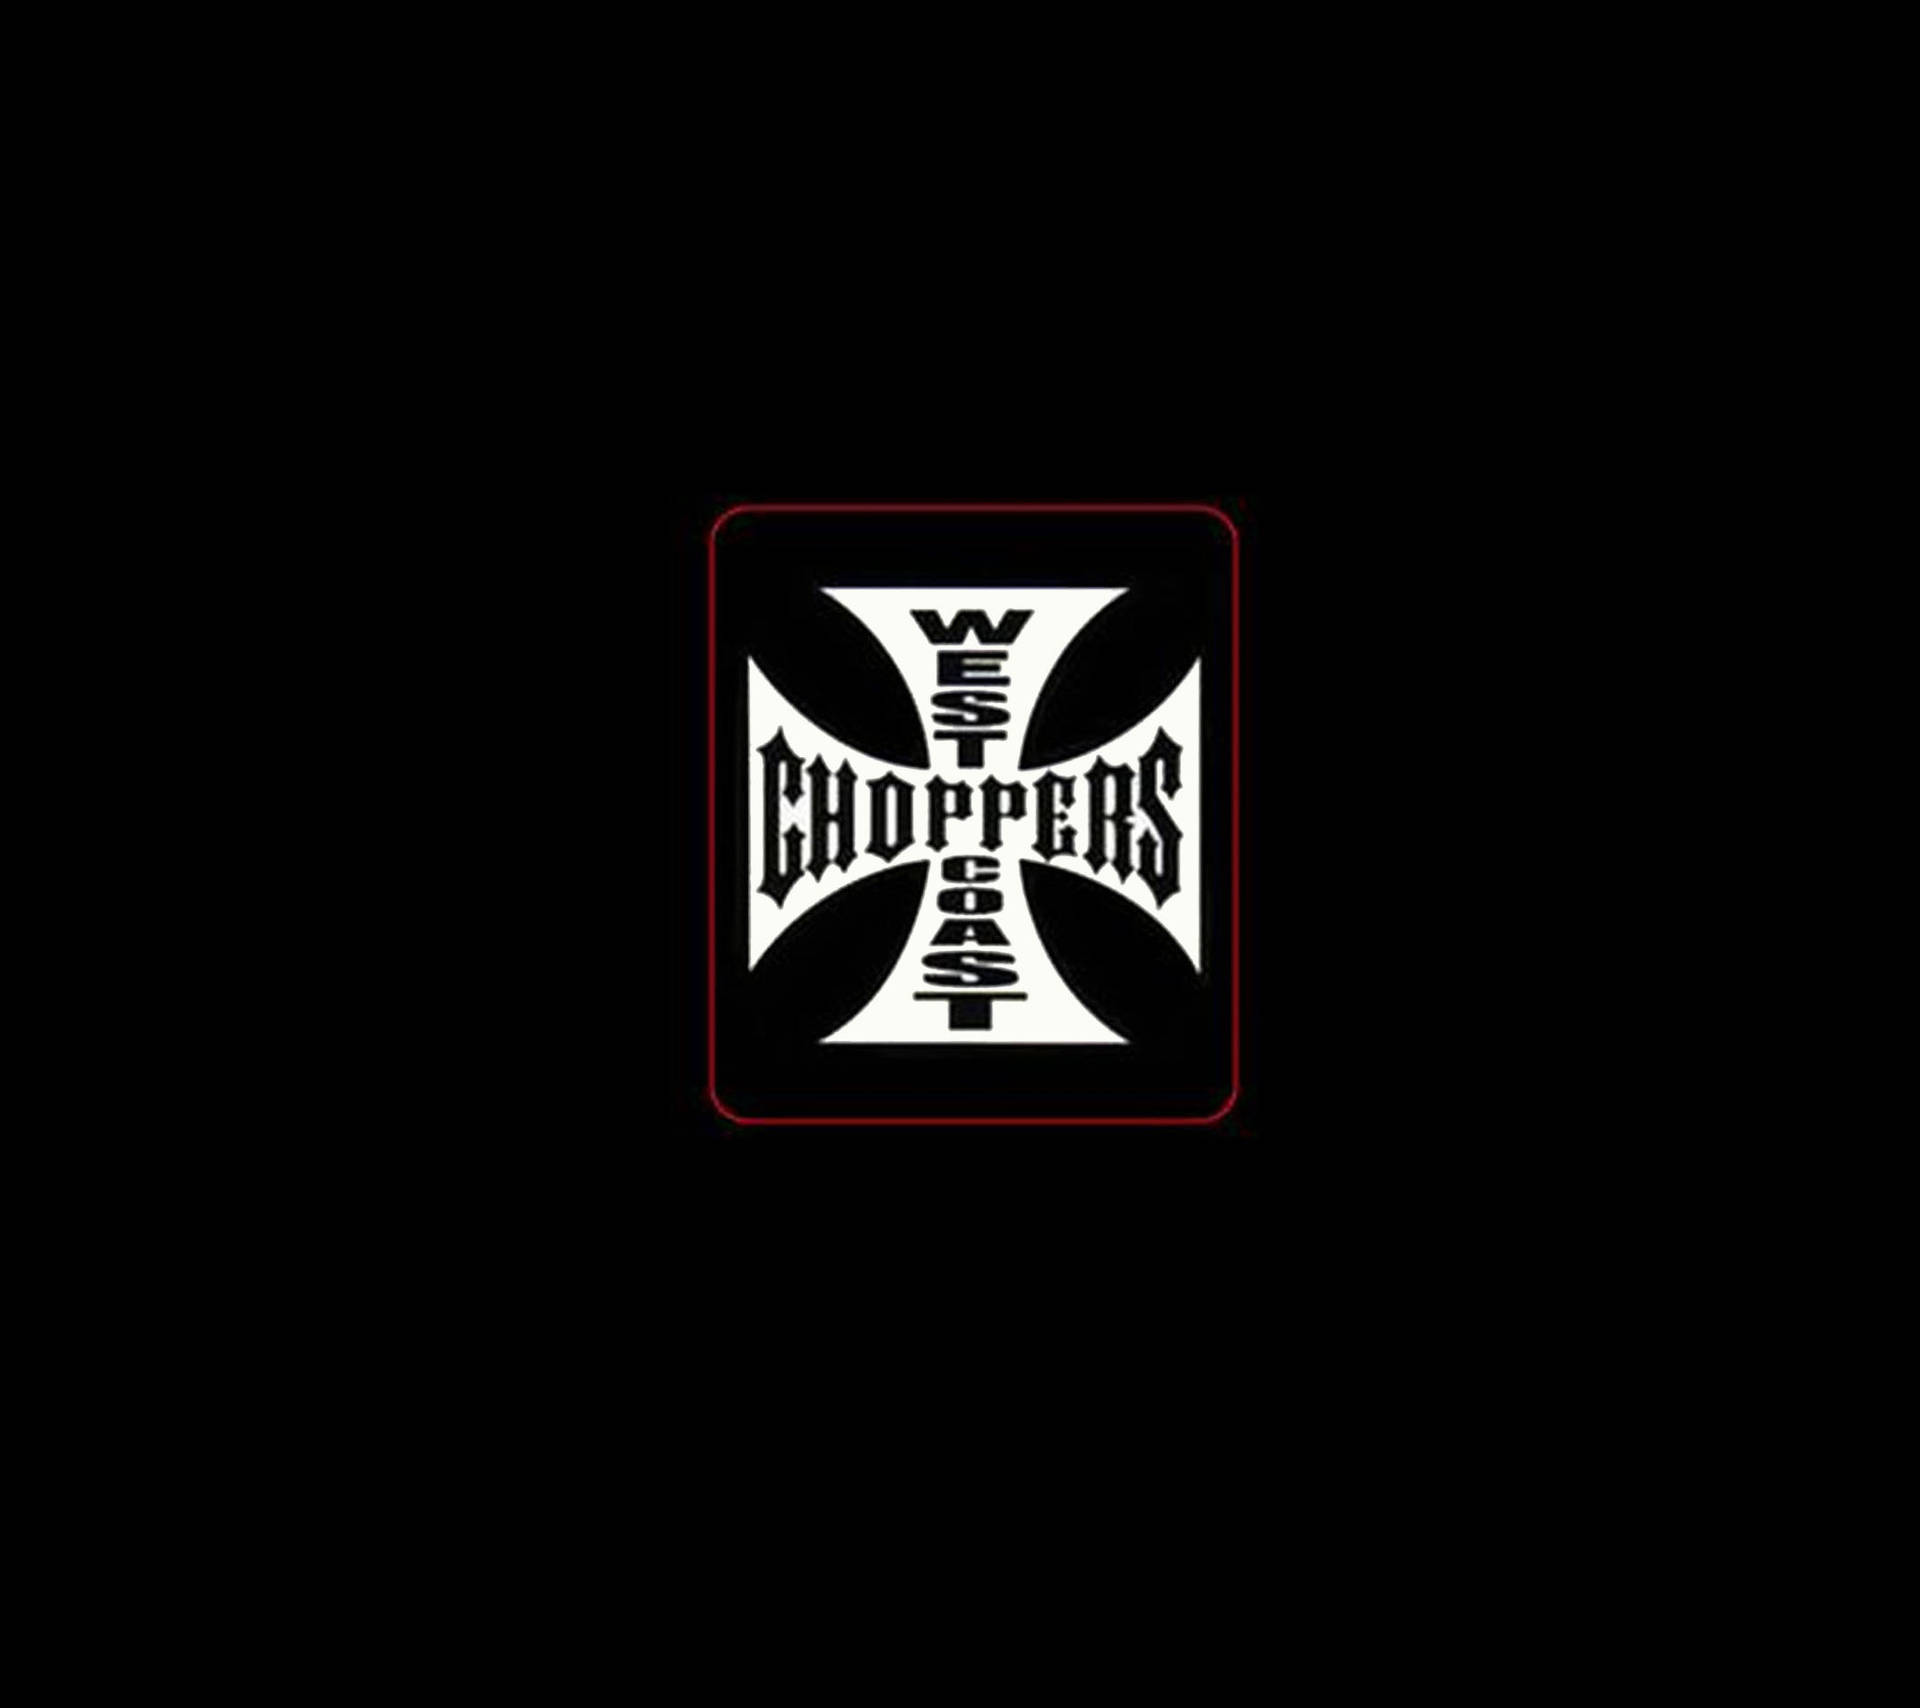 West Coast Choppers - Tradition Of Excellence Background